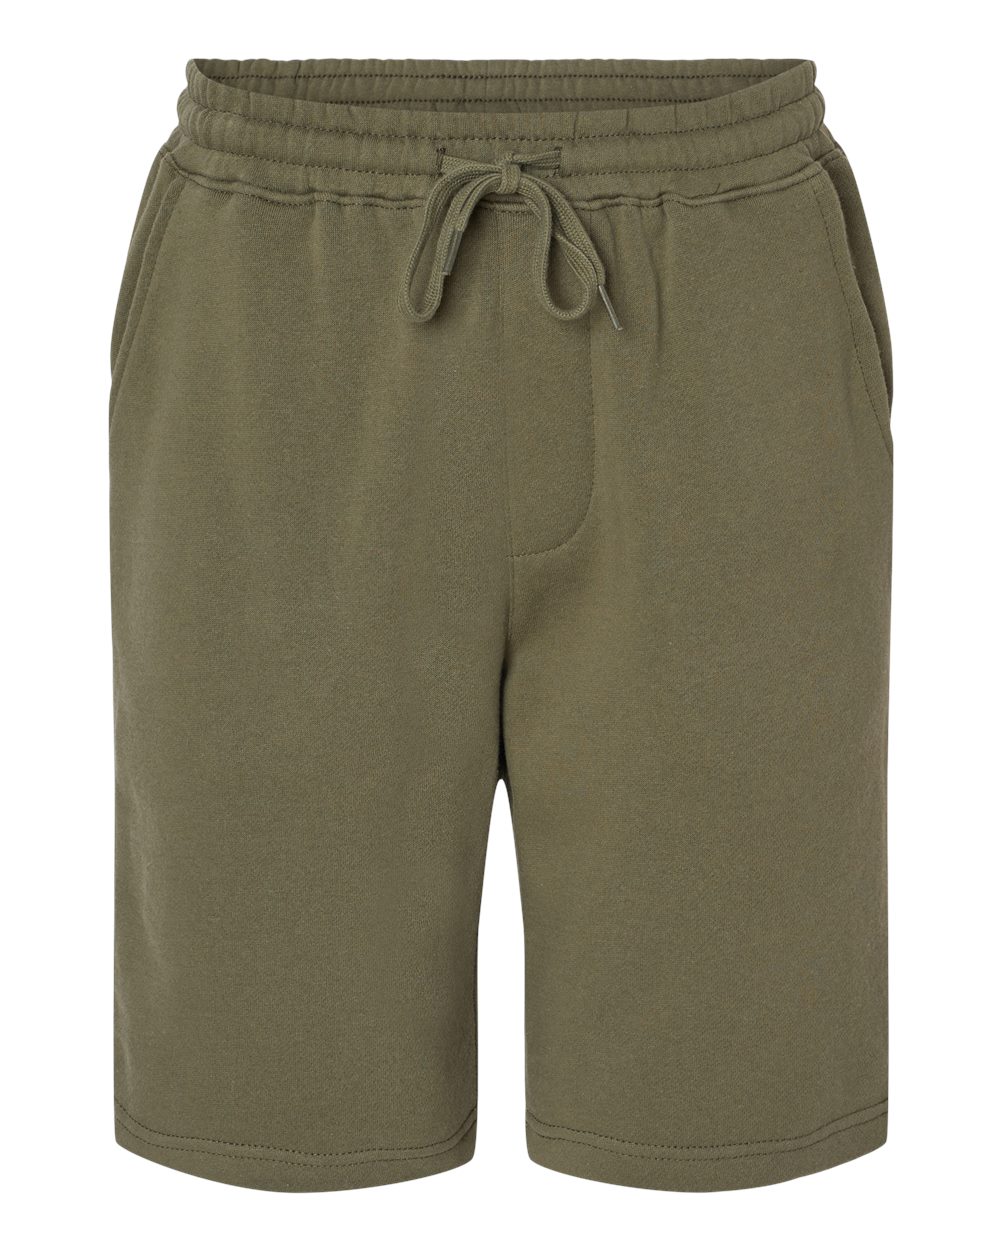 Front view of Midweight Fleece Shorts